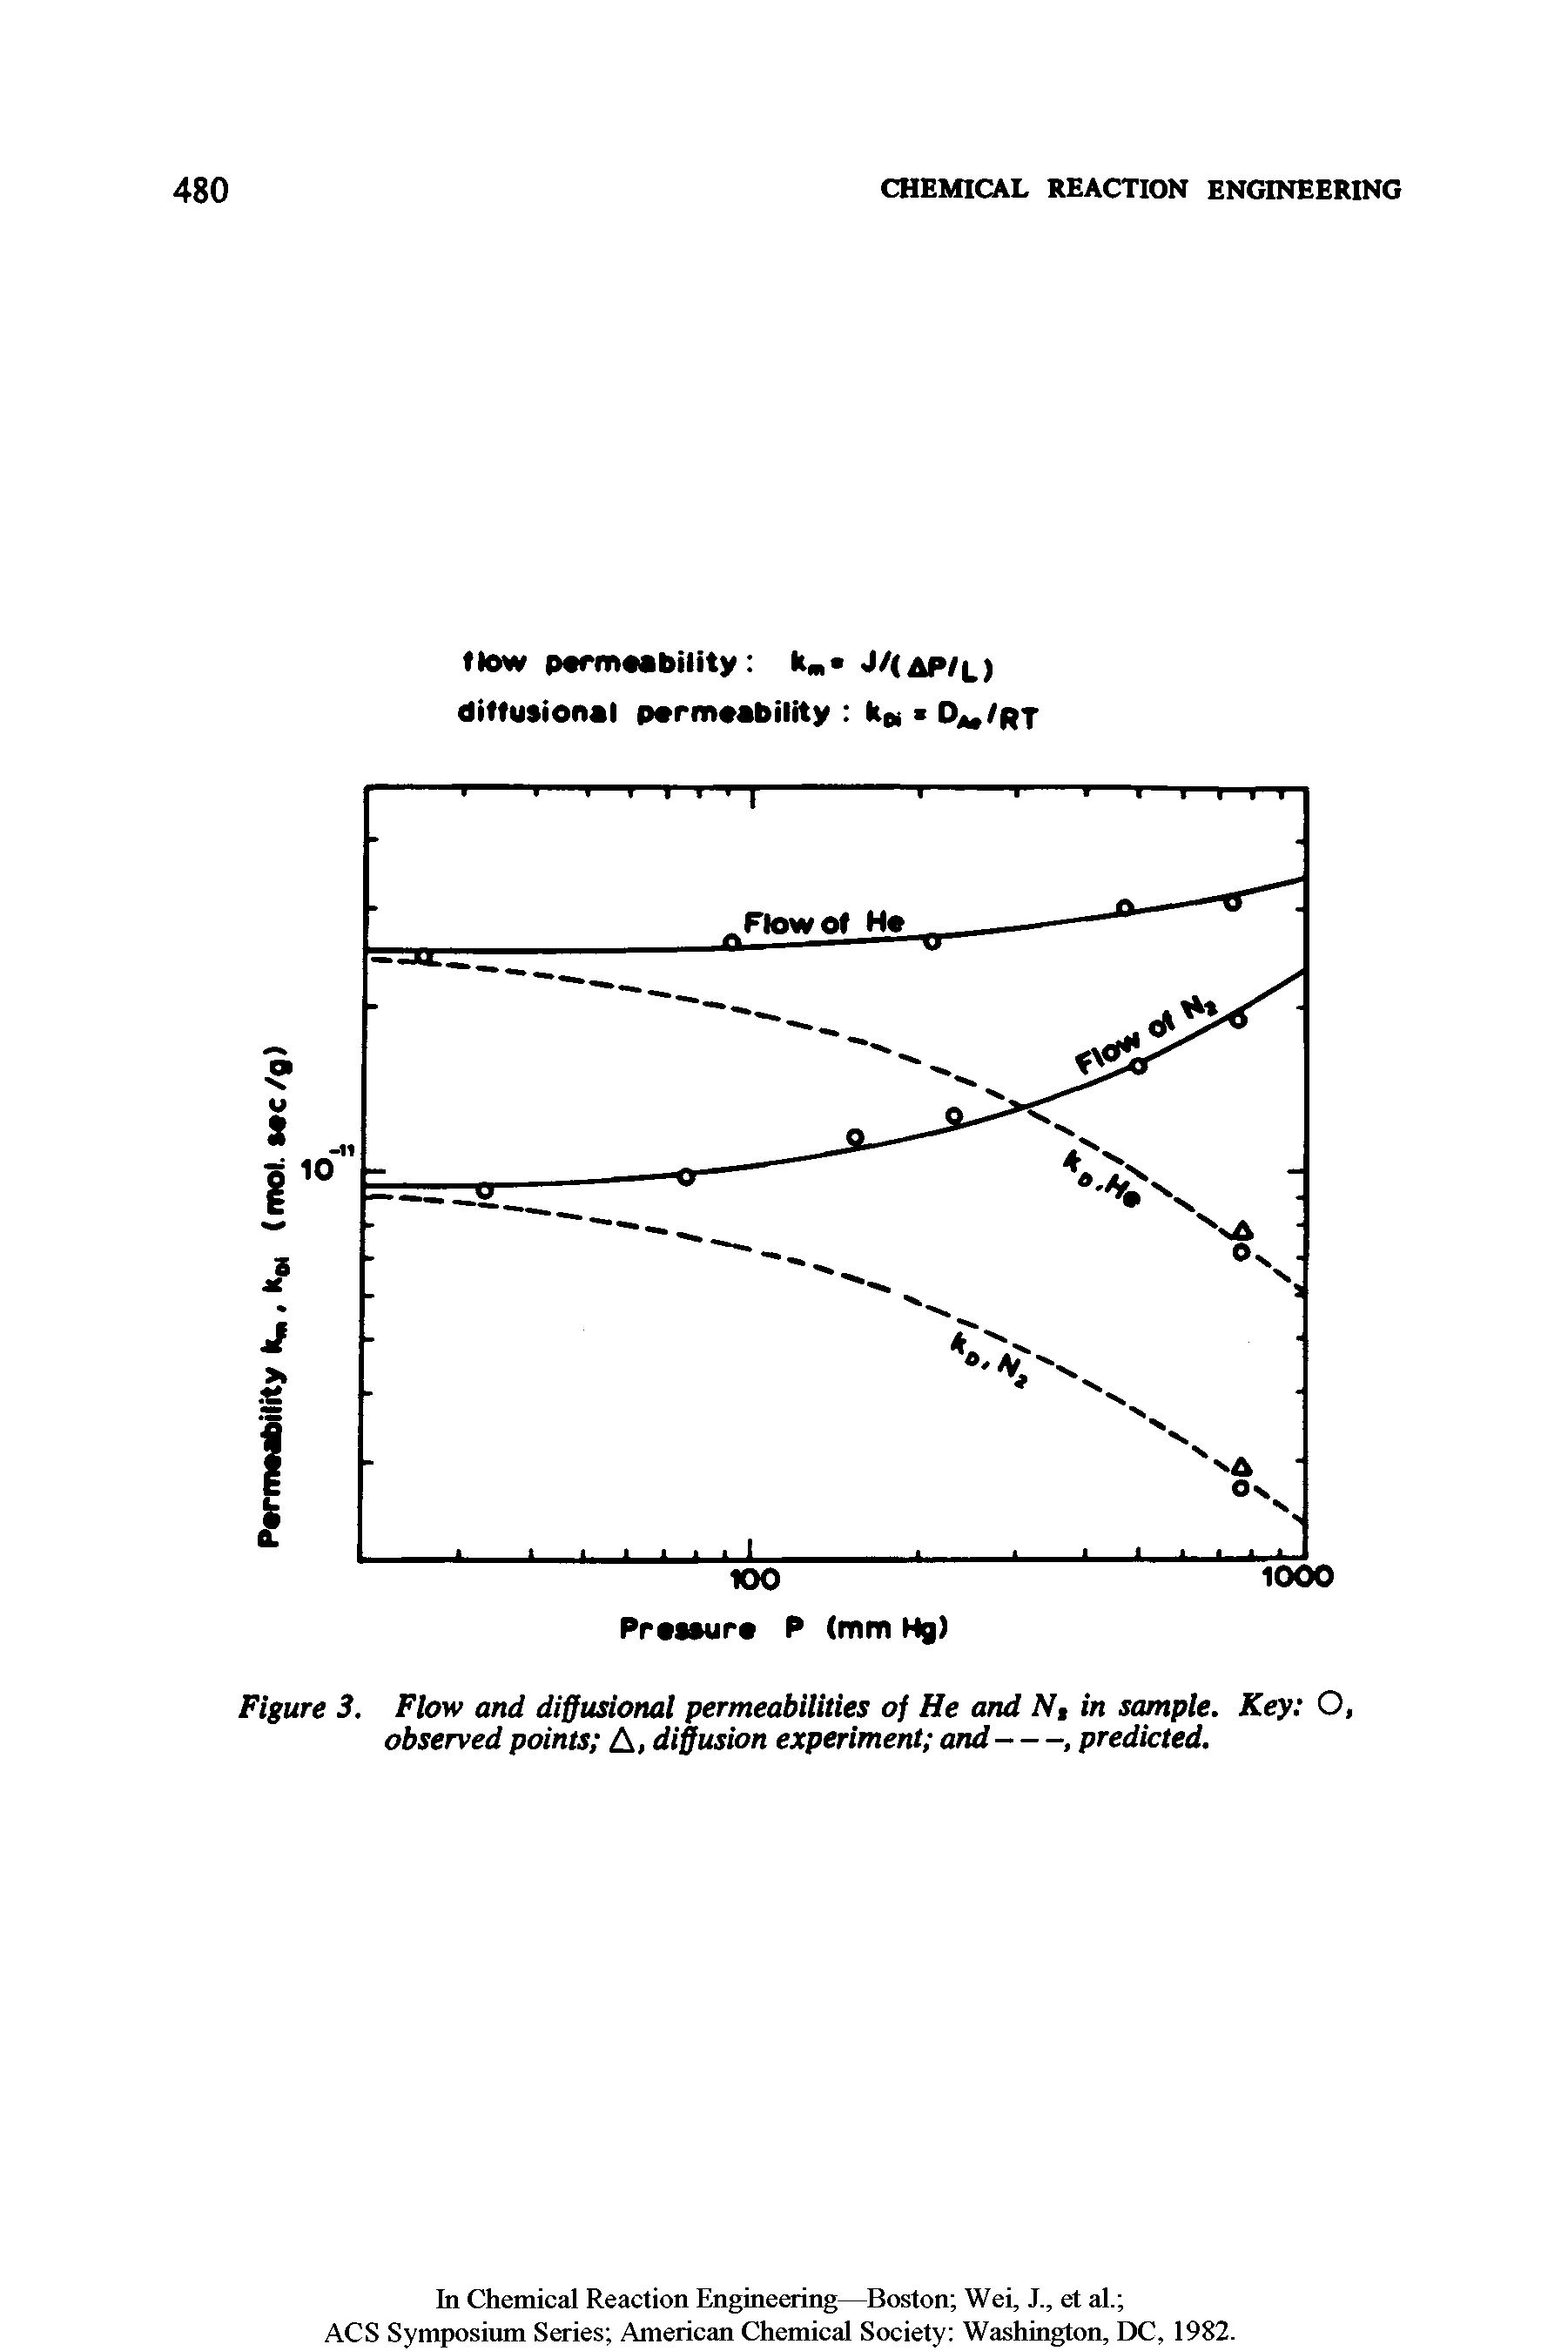 Figure 3. Flow and diffusional permeabilities of He and N, in sample. Key O, observed points A, diffusion experiment and-----------------, predicted.